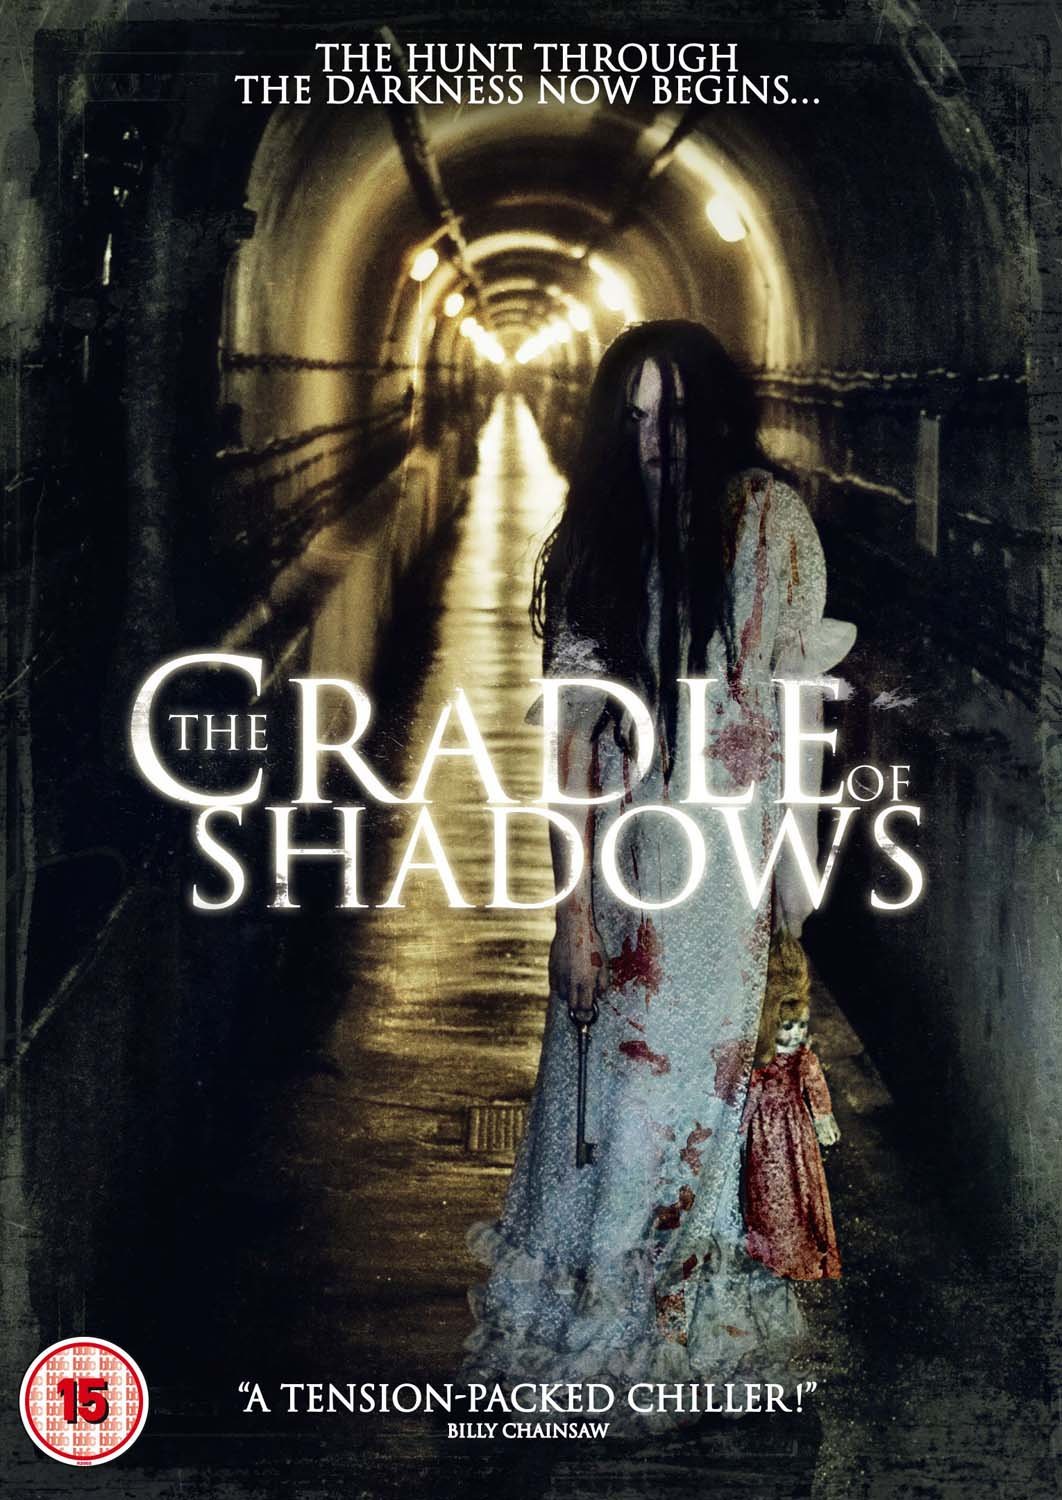 The Cradle of shadows (2015)